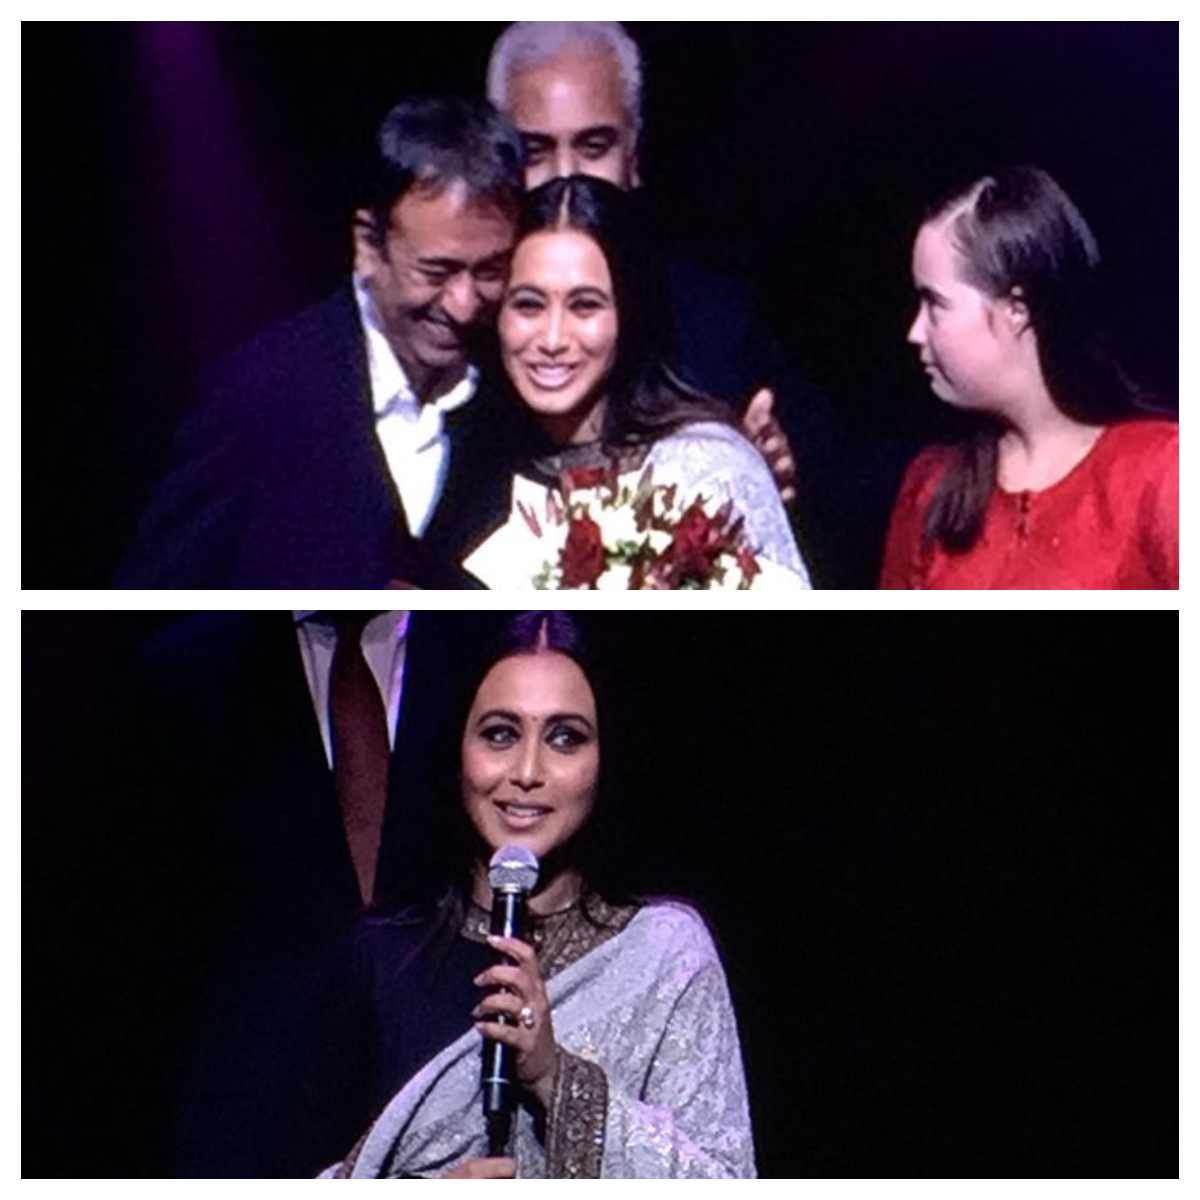 EXCLUSIVE: Rani Mukerji on winning Best Actress at IFFM 2018: Blessed to get my 1st award after becoming a mom